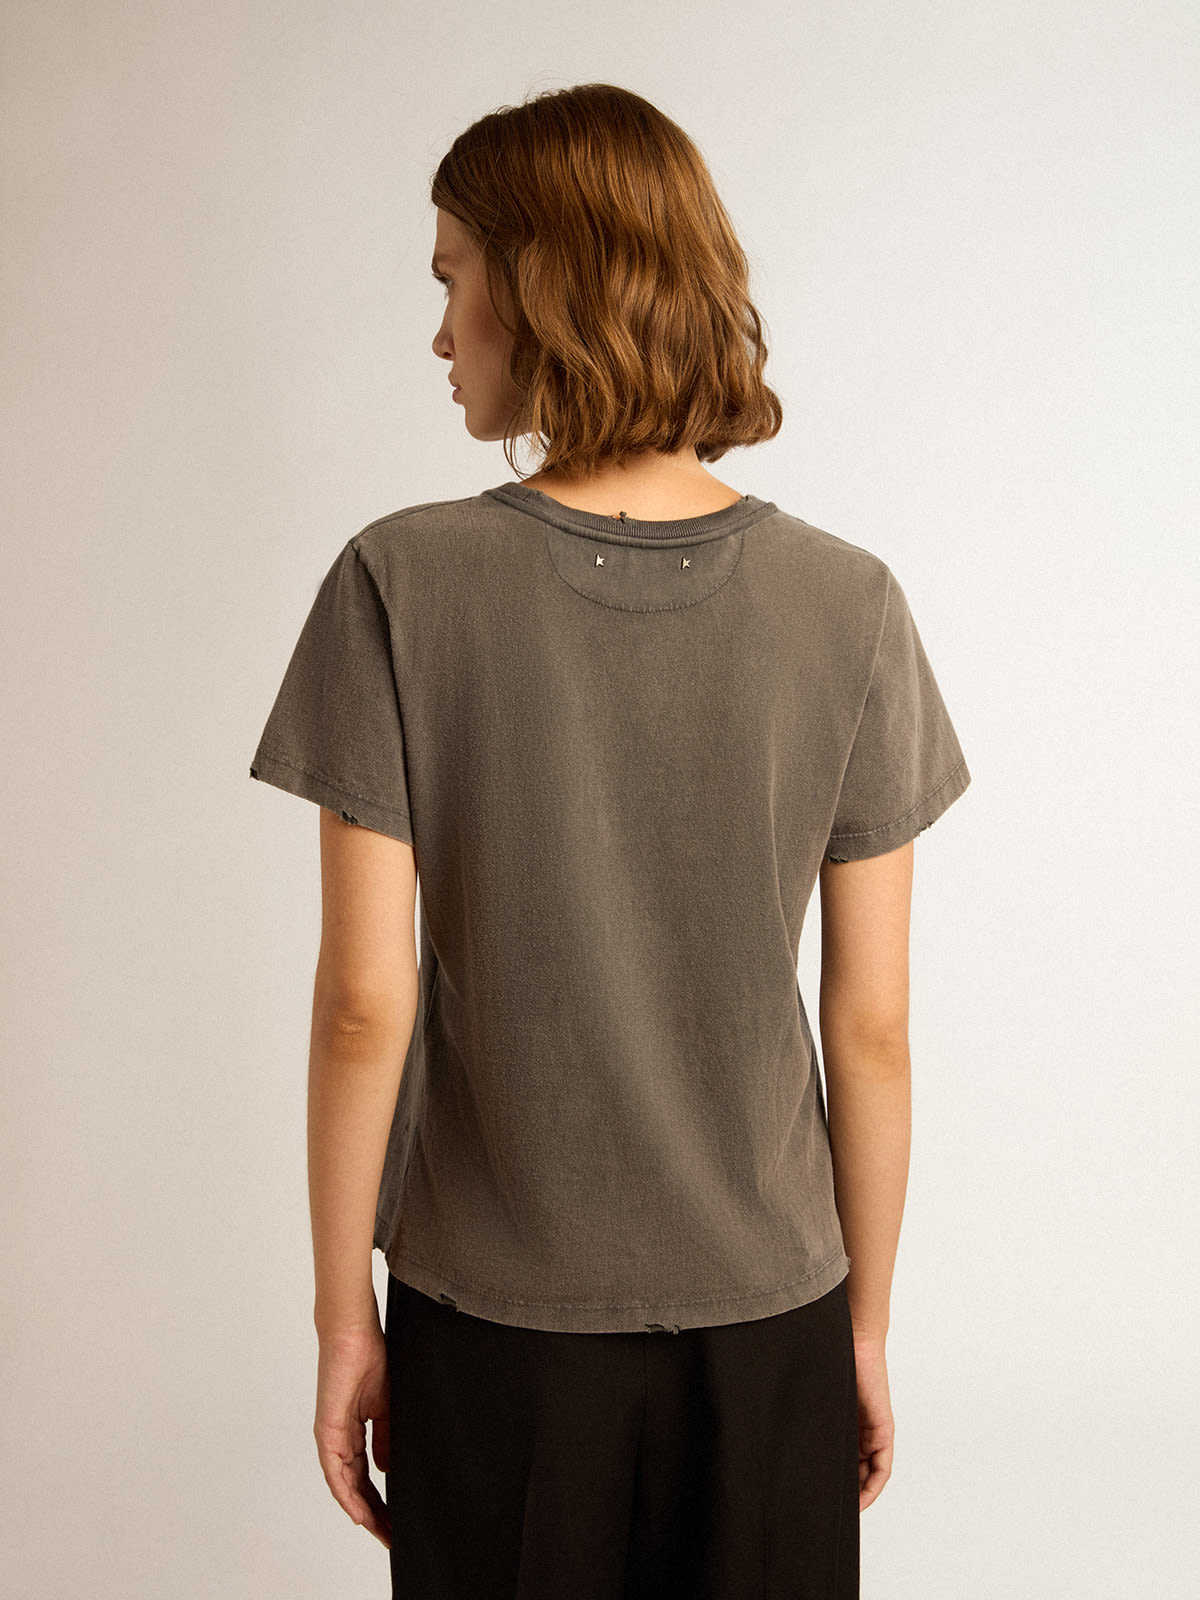 Golden Goose - Golden Collection T-shirt in anthracite gray with a distressed treatment in 